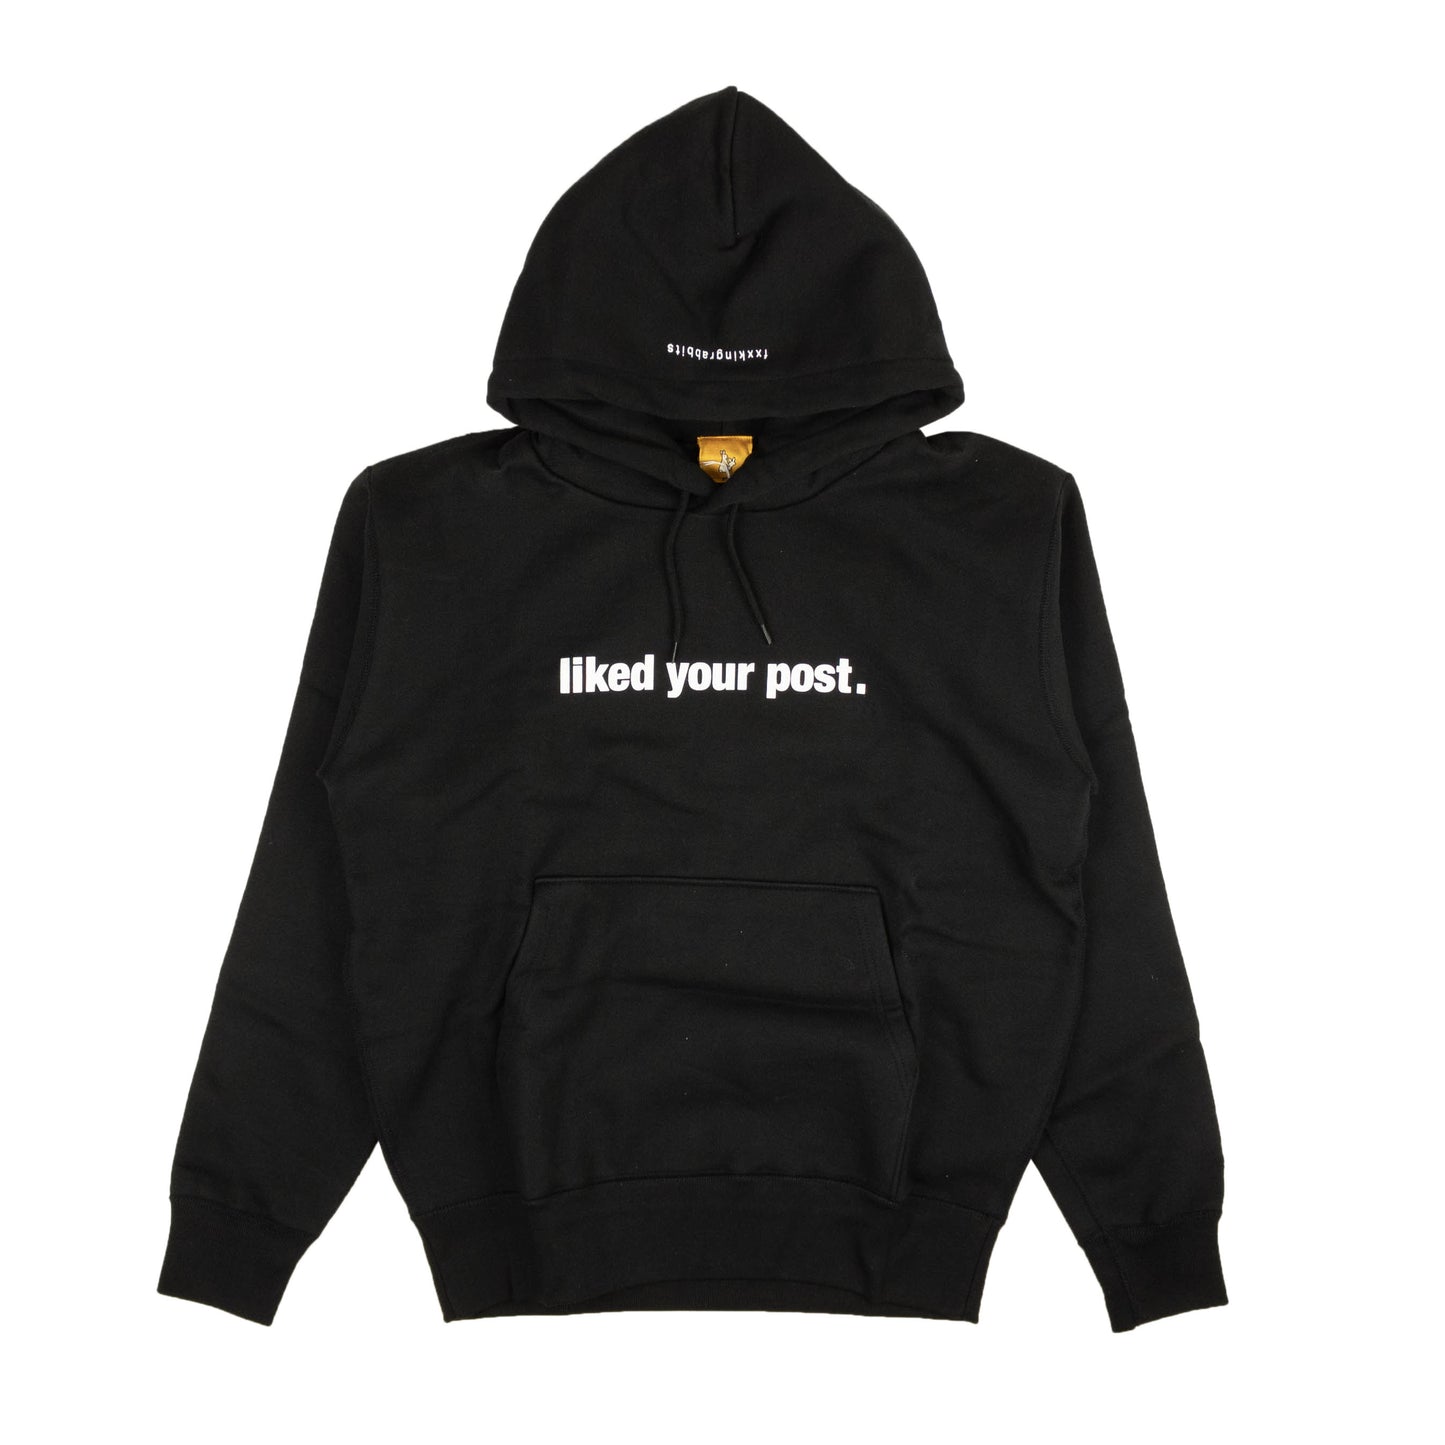 Fr2 Liked Your Post Hoodie - Black